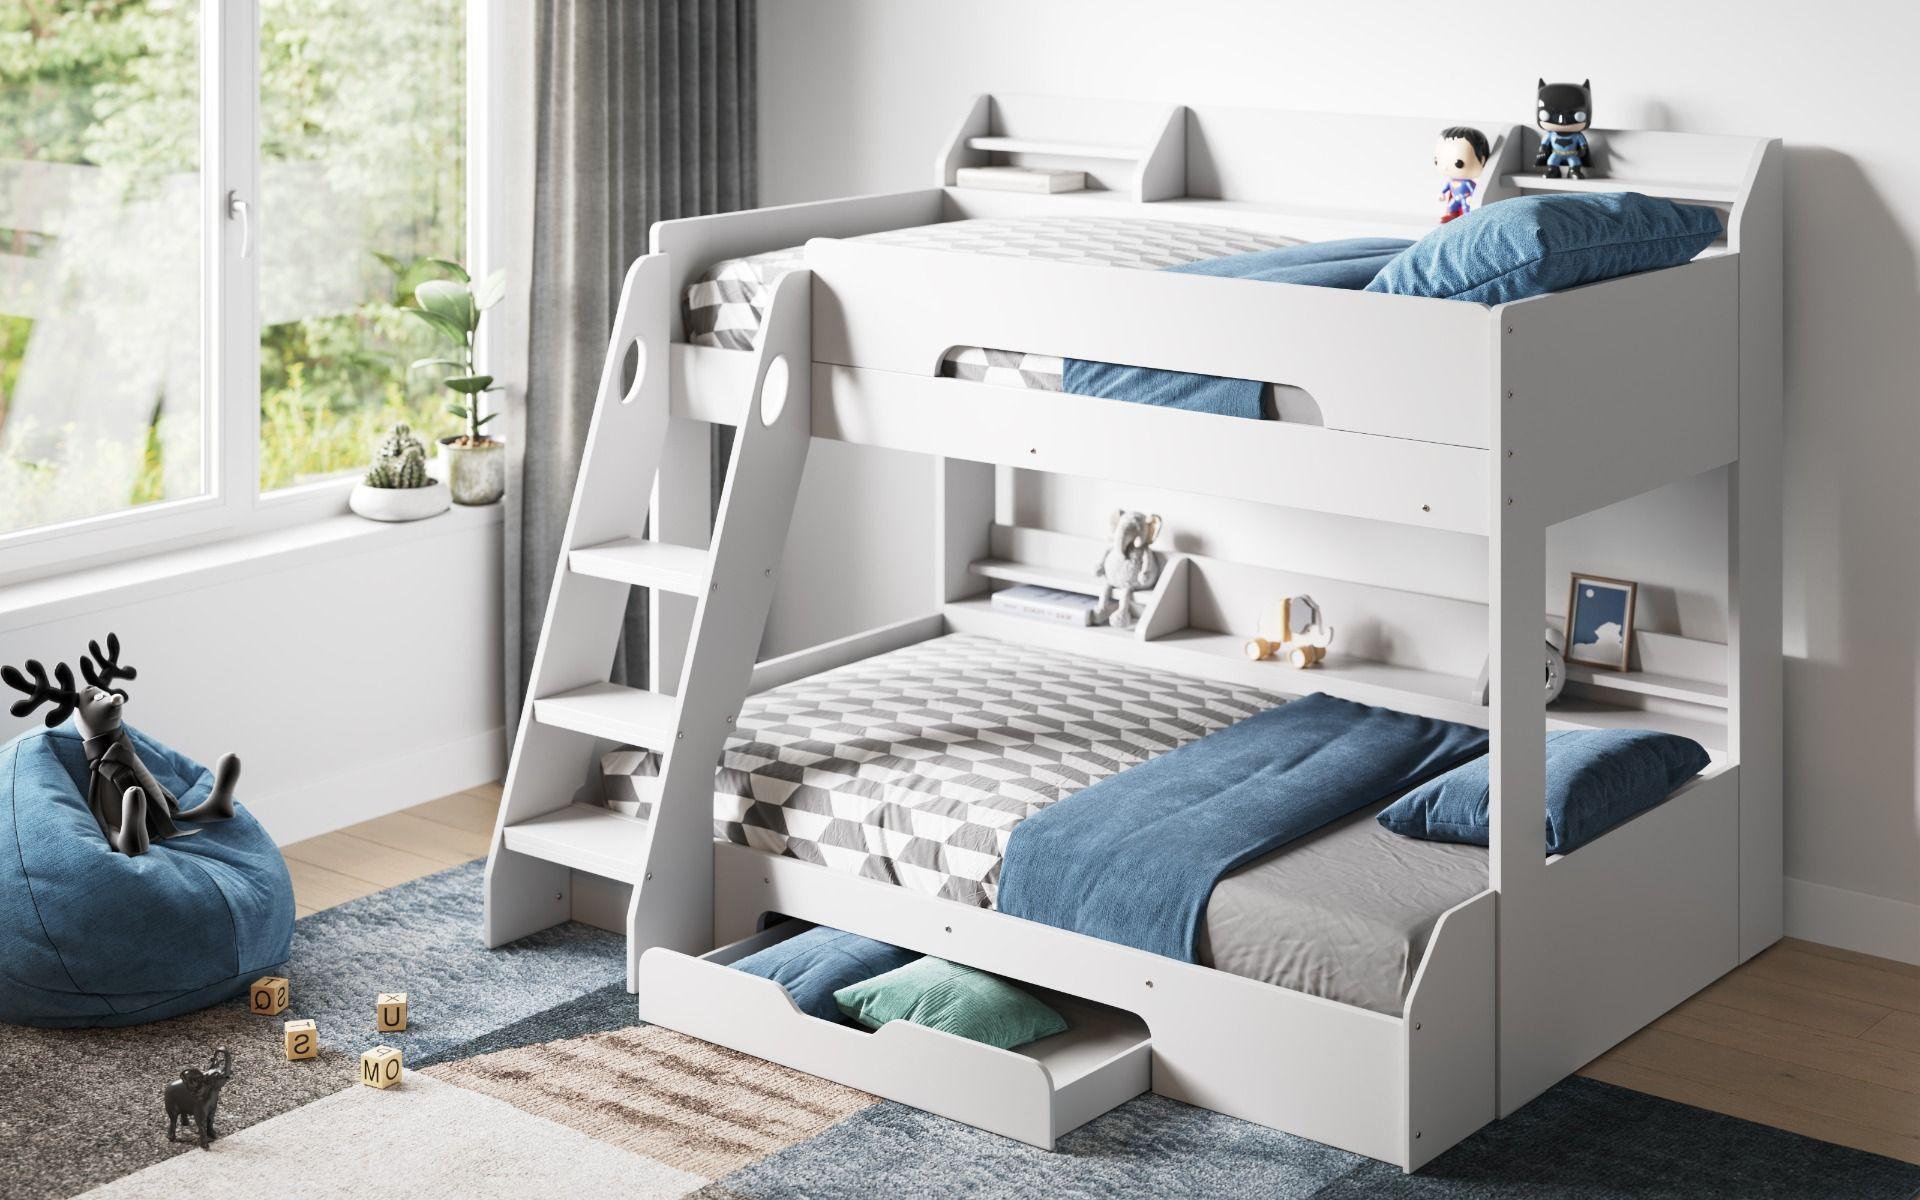 Flick Triple Bunk Bed Frame with Storage Draws in White - Complete Comfort Beds